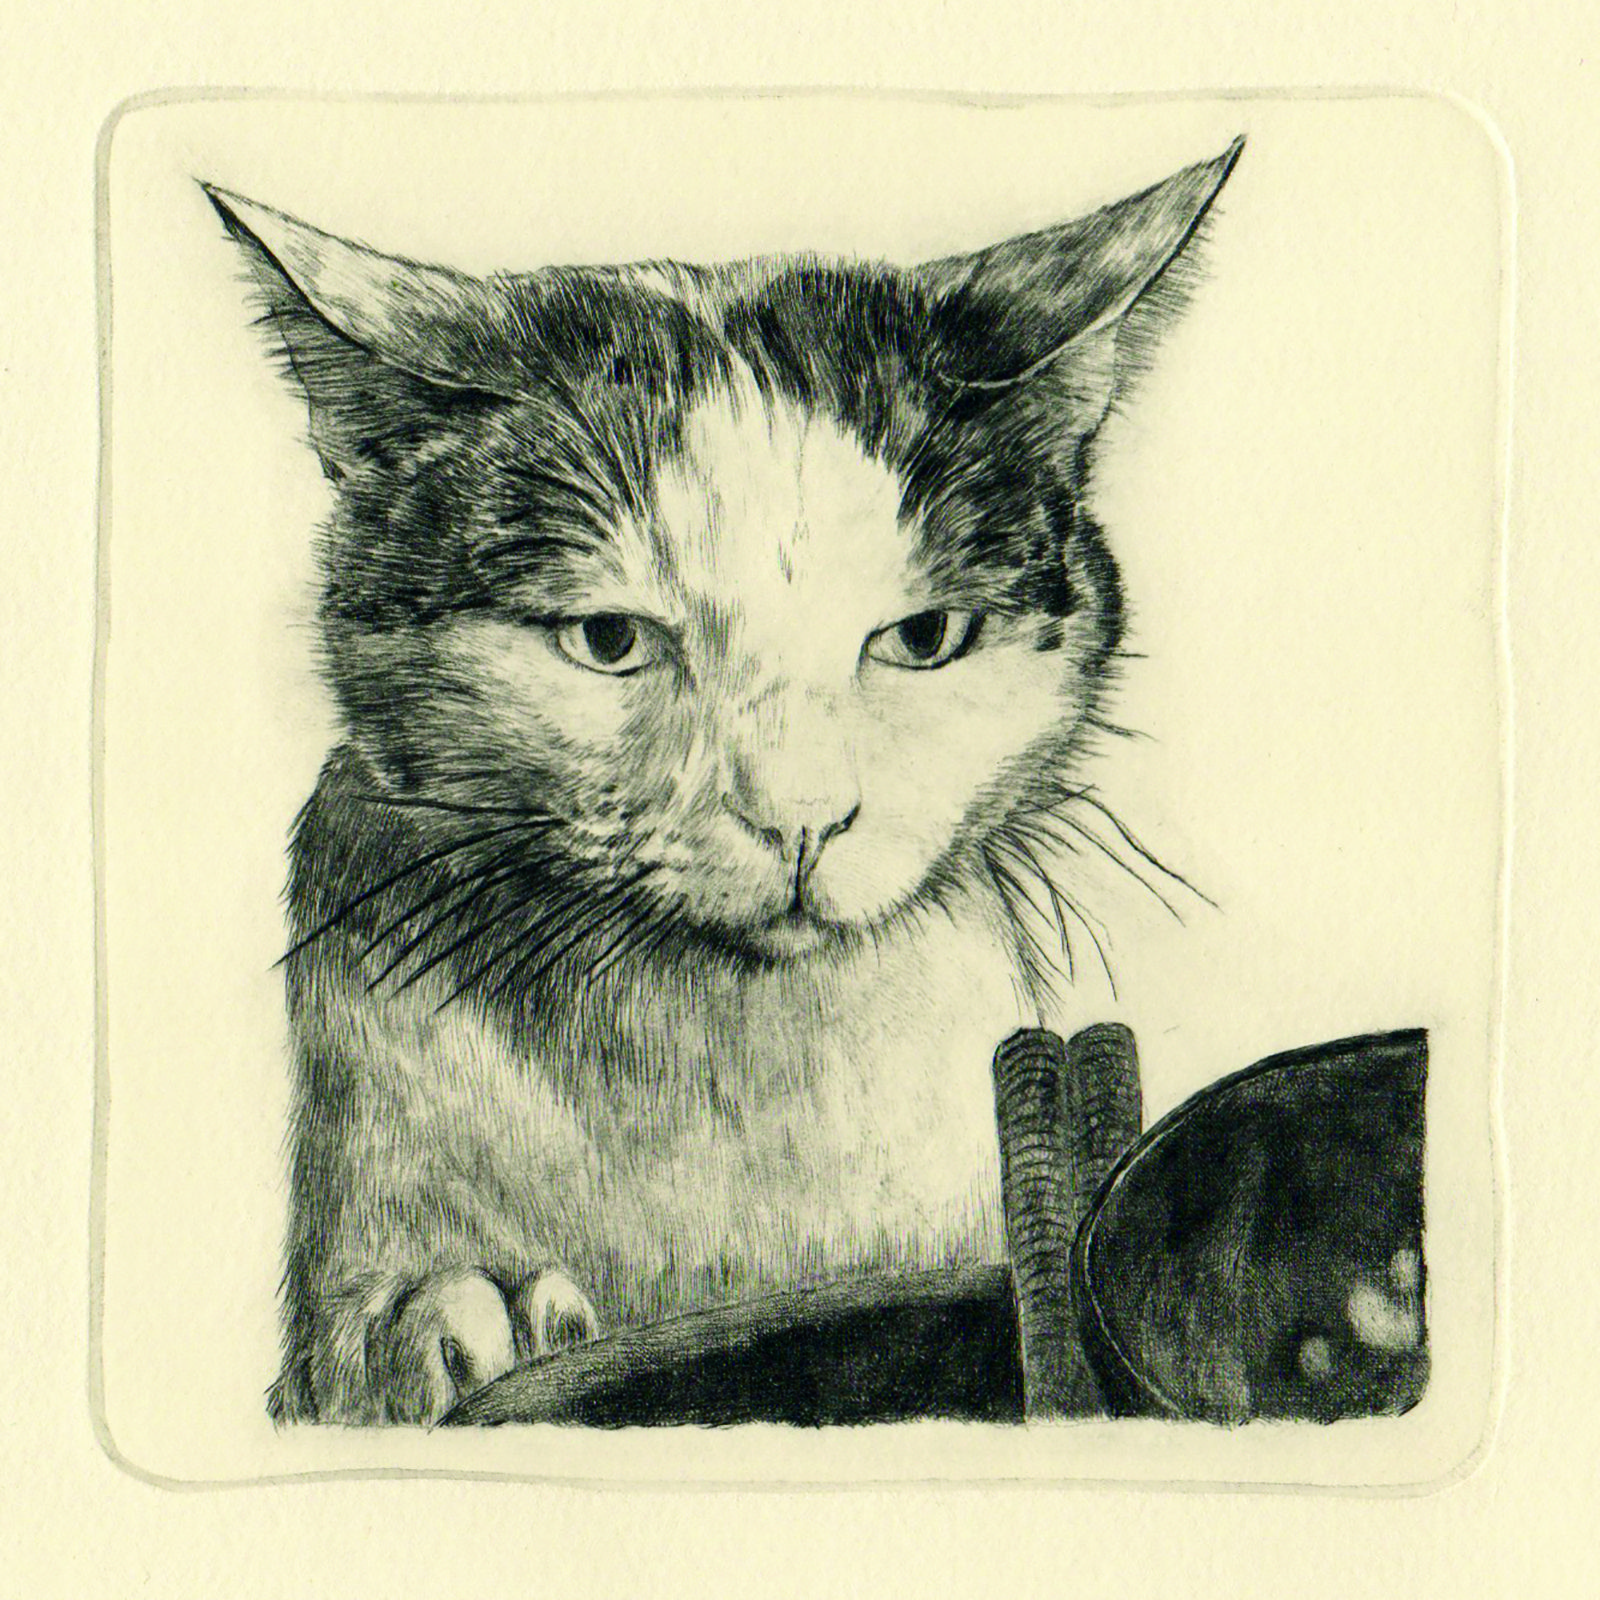 Hachitaro thinks about his meal… (drypoint etching by Yaemi Shigyo)